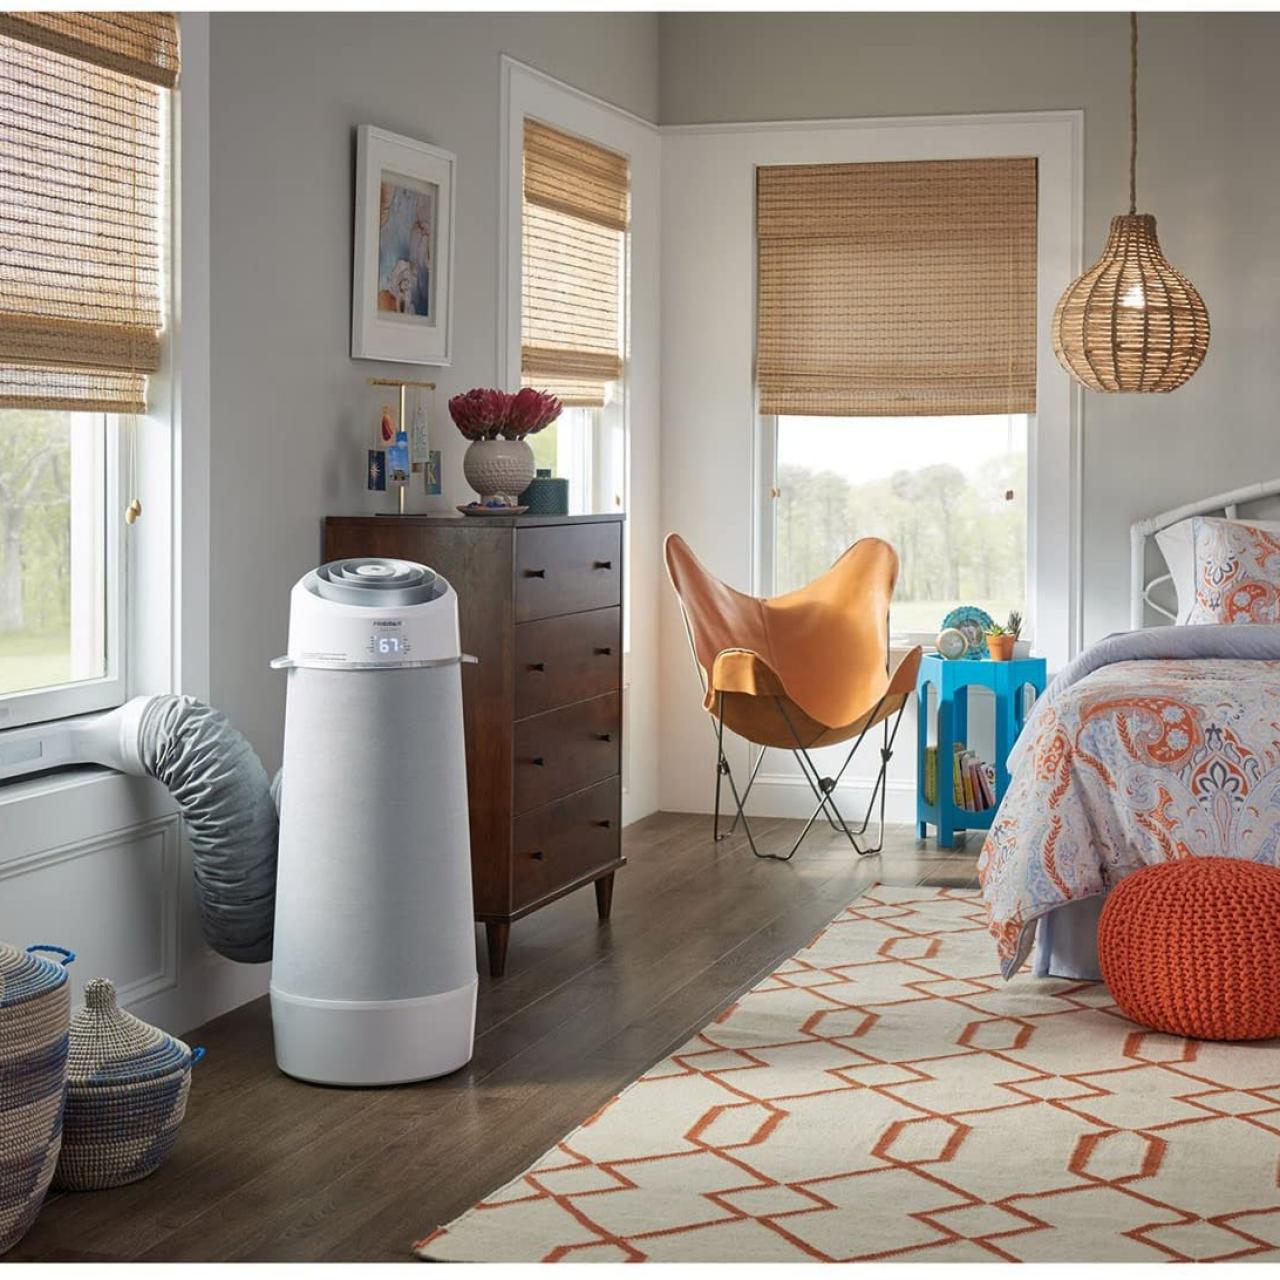 https://hgtvhome.sndimg.com/content/dam/images/hgtv/products/2021/5/7/2/rx_amazon_frigidaire-fgpc1044u1-white-cool-connect-smart-cylinder-portable-air-conditioner.jpeg.rend.hgtvcom.1280.1280.suffix/1620398895523.jpeg